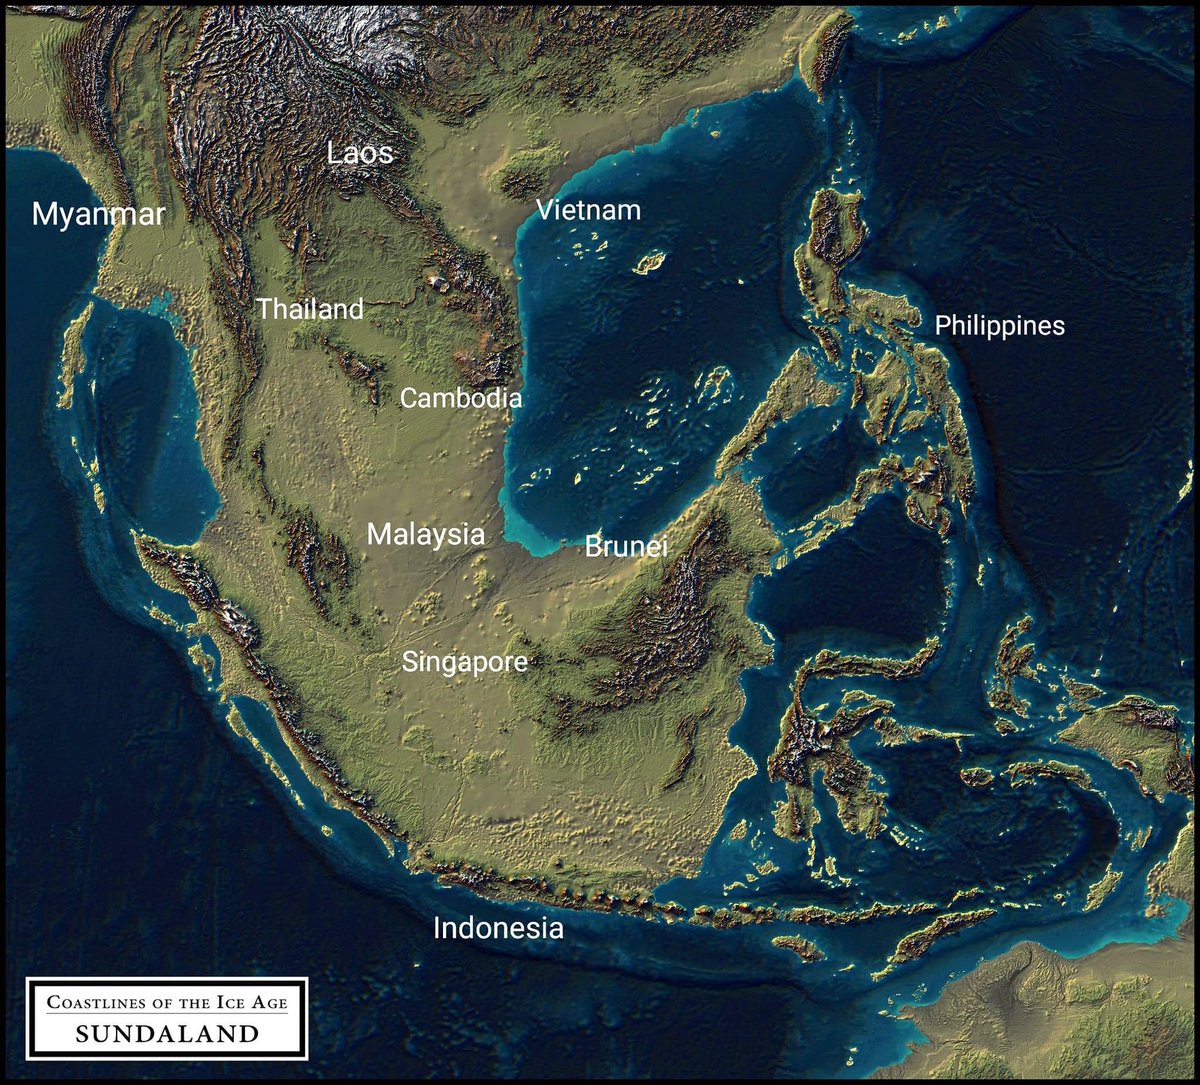 This is what Malaysia 🇲🇾 looked like around 21,000 years ago according to geographers. It is known as the Sunda Stage or Sundaland. Sundaland has an area of ​​up to 1,800,000 square km compared to Malaysia's area of ​​around 330,000 square km. Then after a few thousand years,…